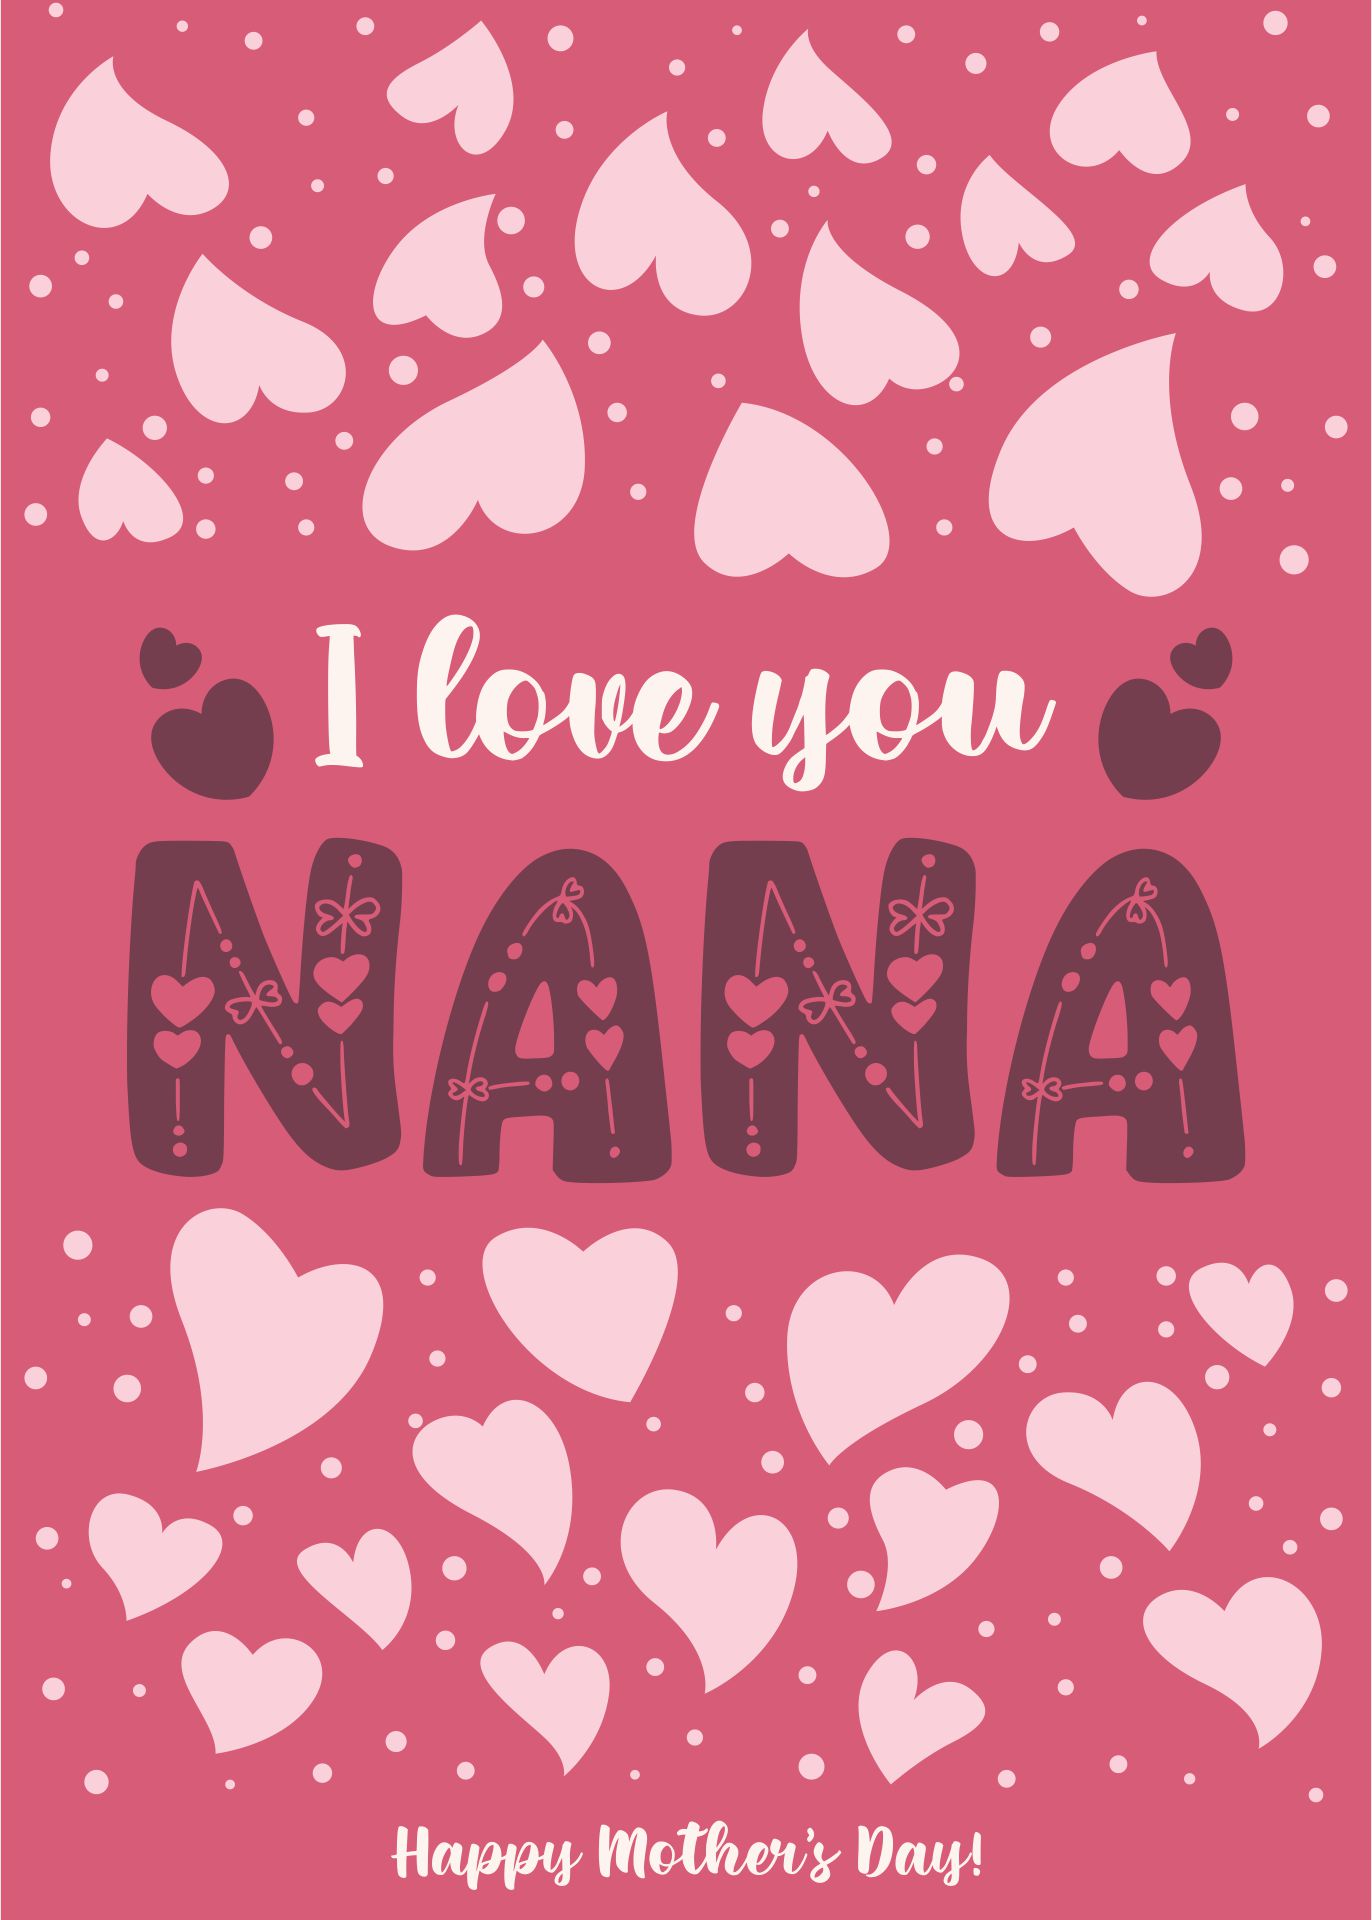 7 Best Images of Mother's Day Nana Printable Cards American Greetings